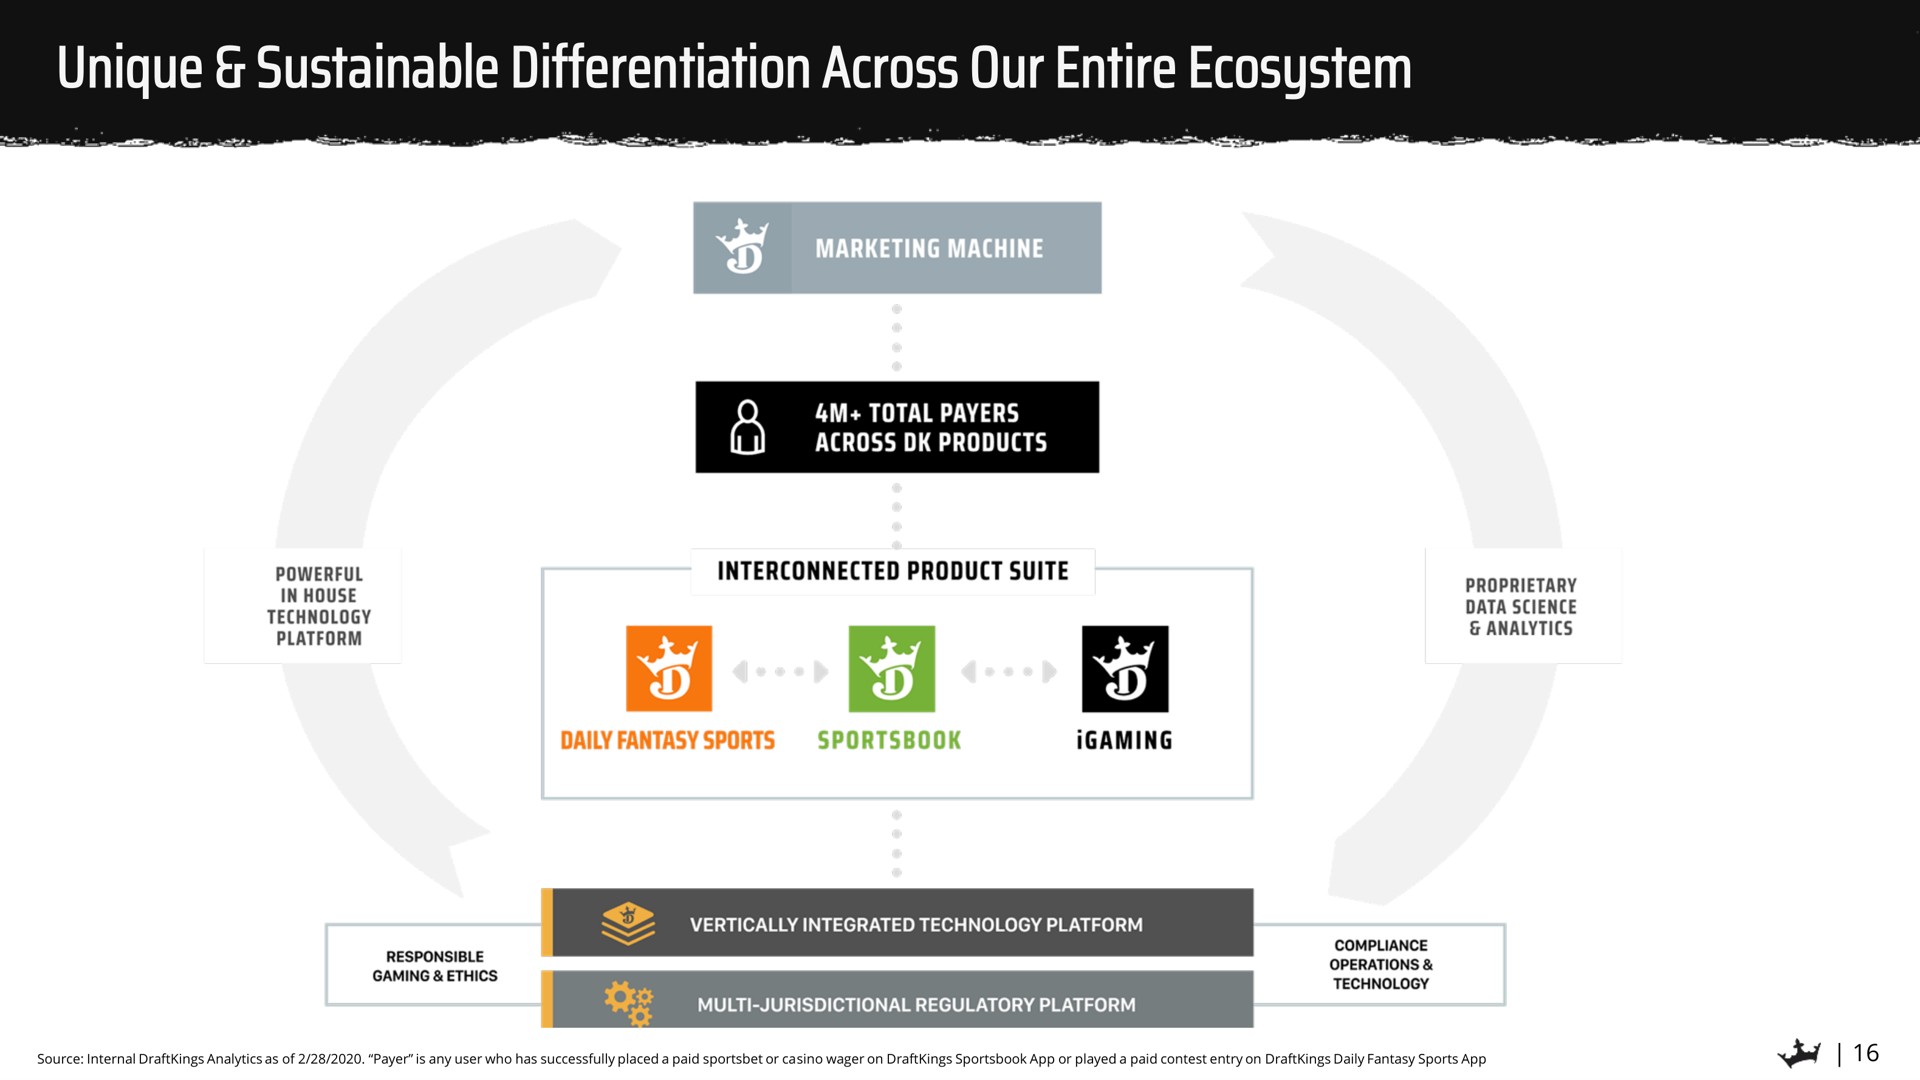 unique sustainable differentiation across our entire ecosystem ure cro a tice | DraftKings